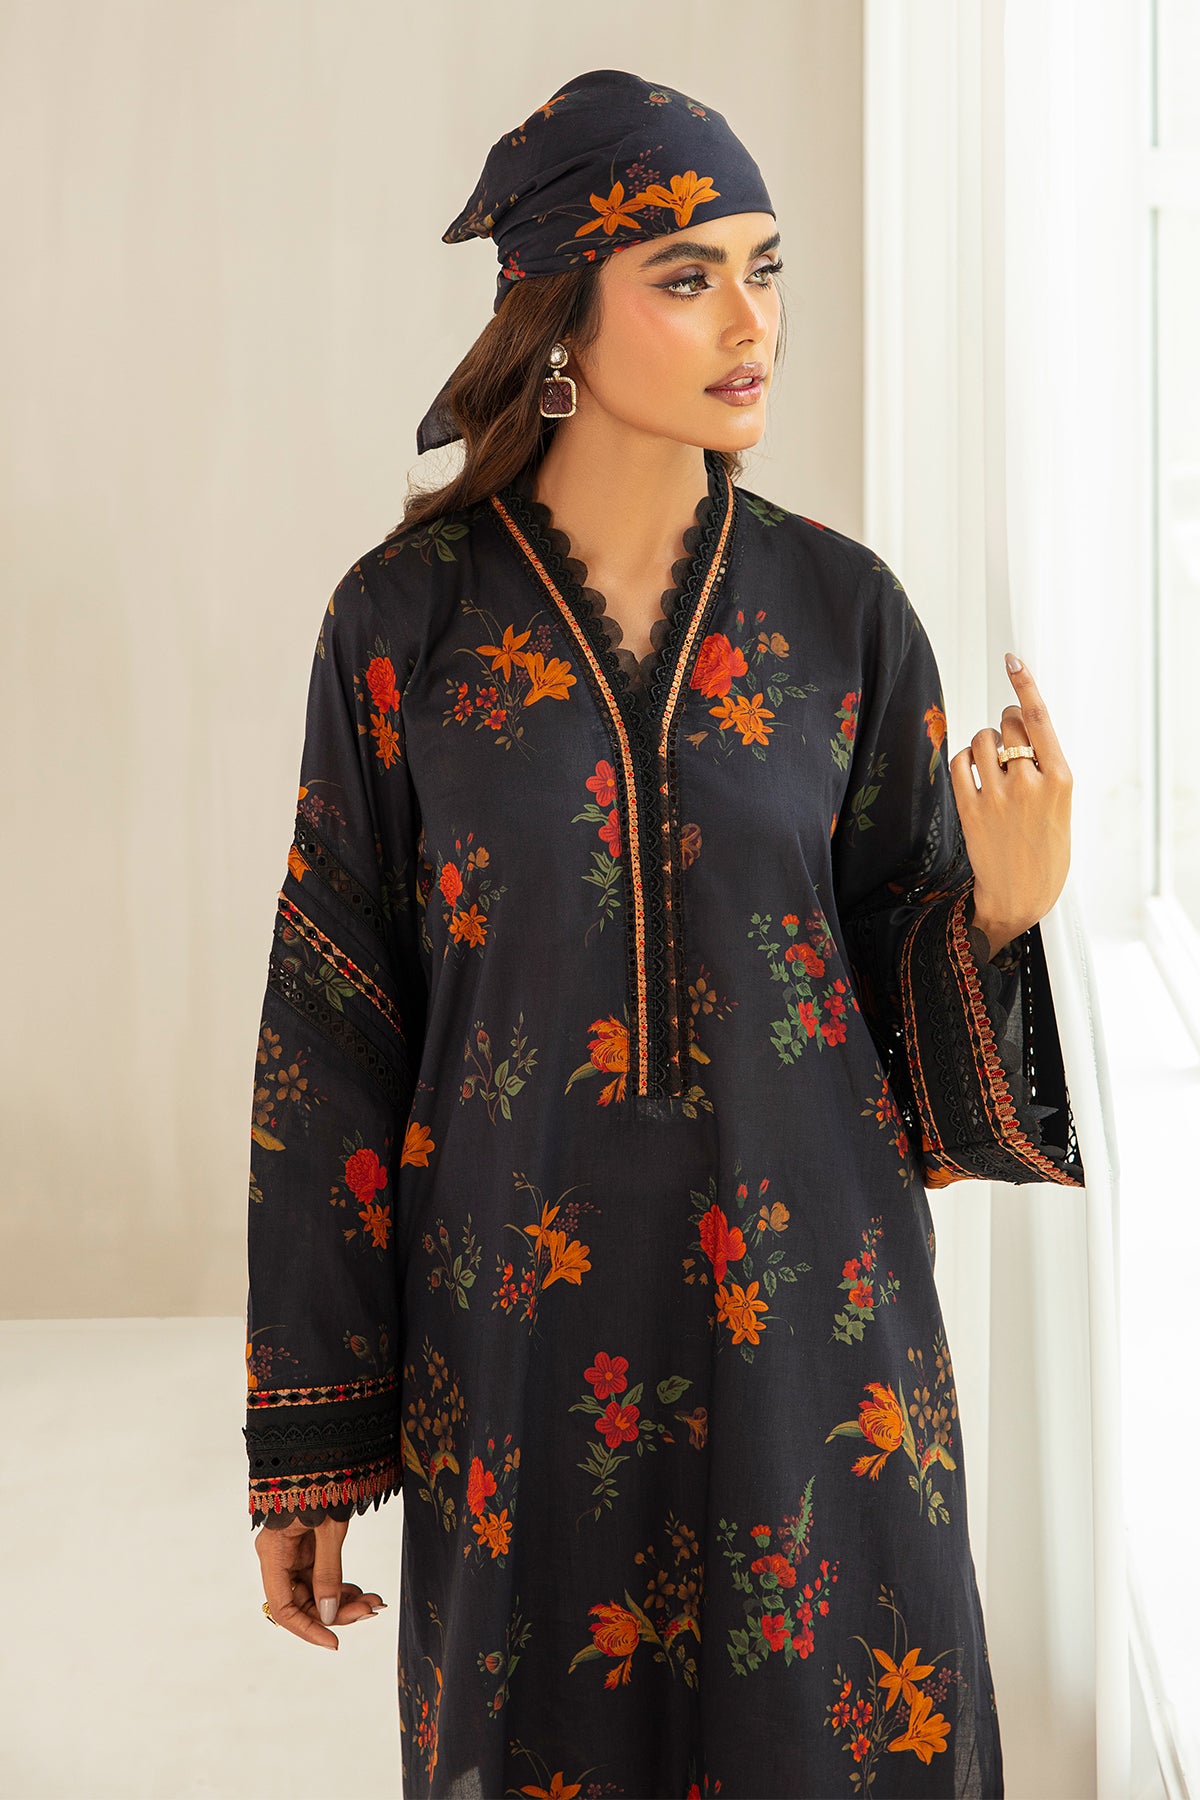 EMBROIDERED LAWN PR-830